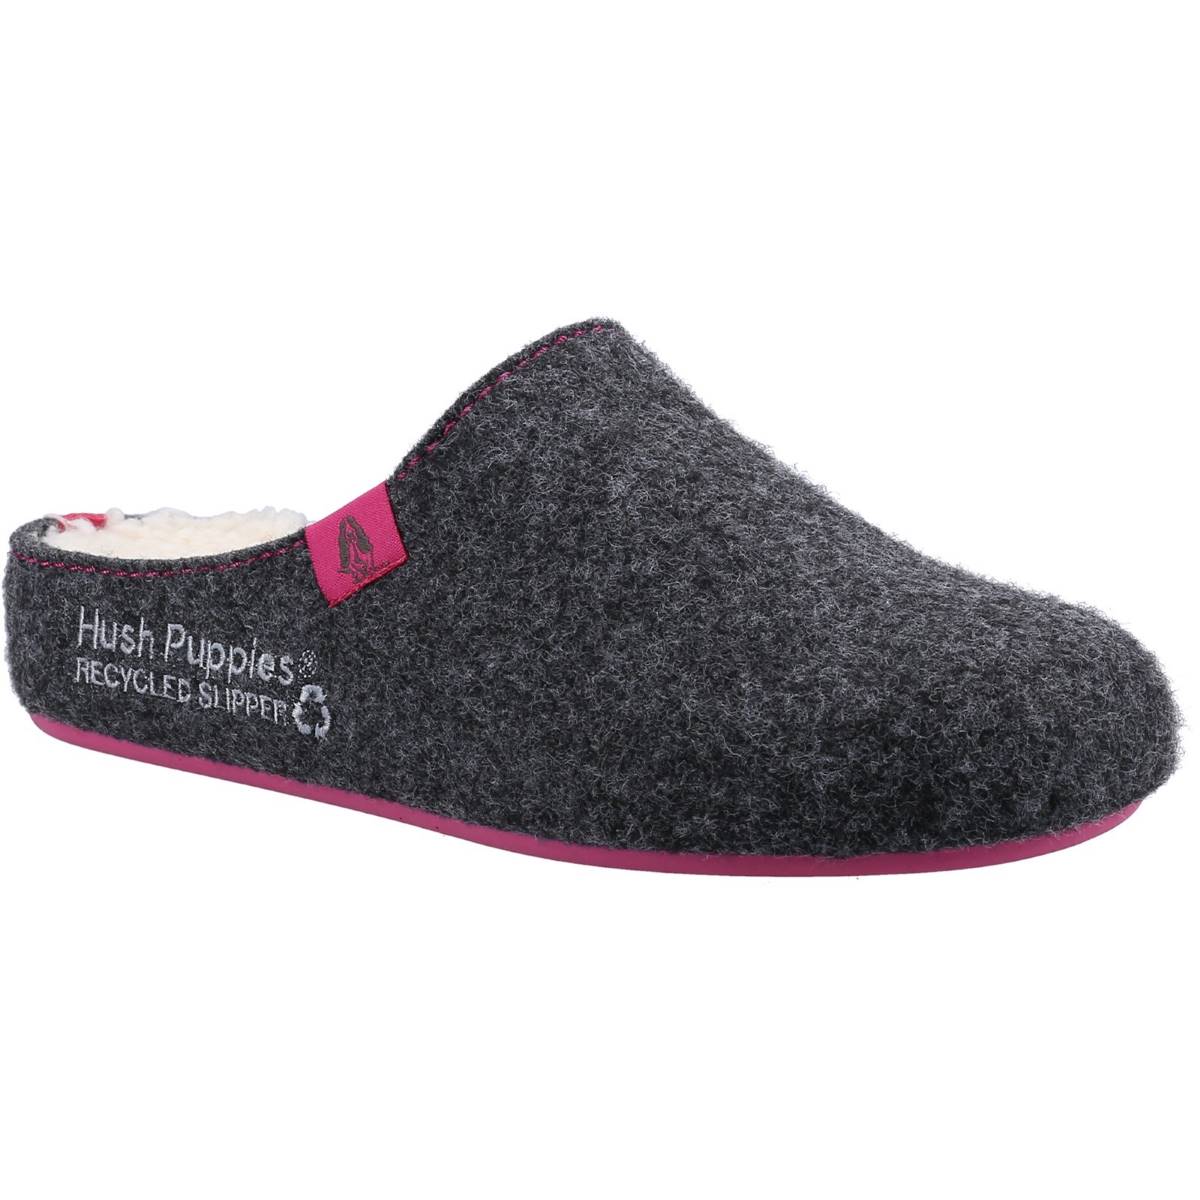 Hush Puppies The Good Slipper Charcoal Womens slippers HPW1000-189-4 in a Plain Textile in Size 5